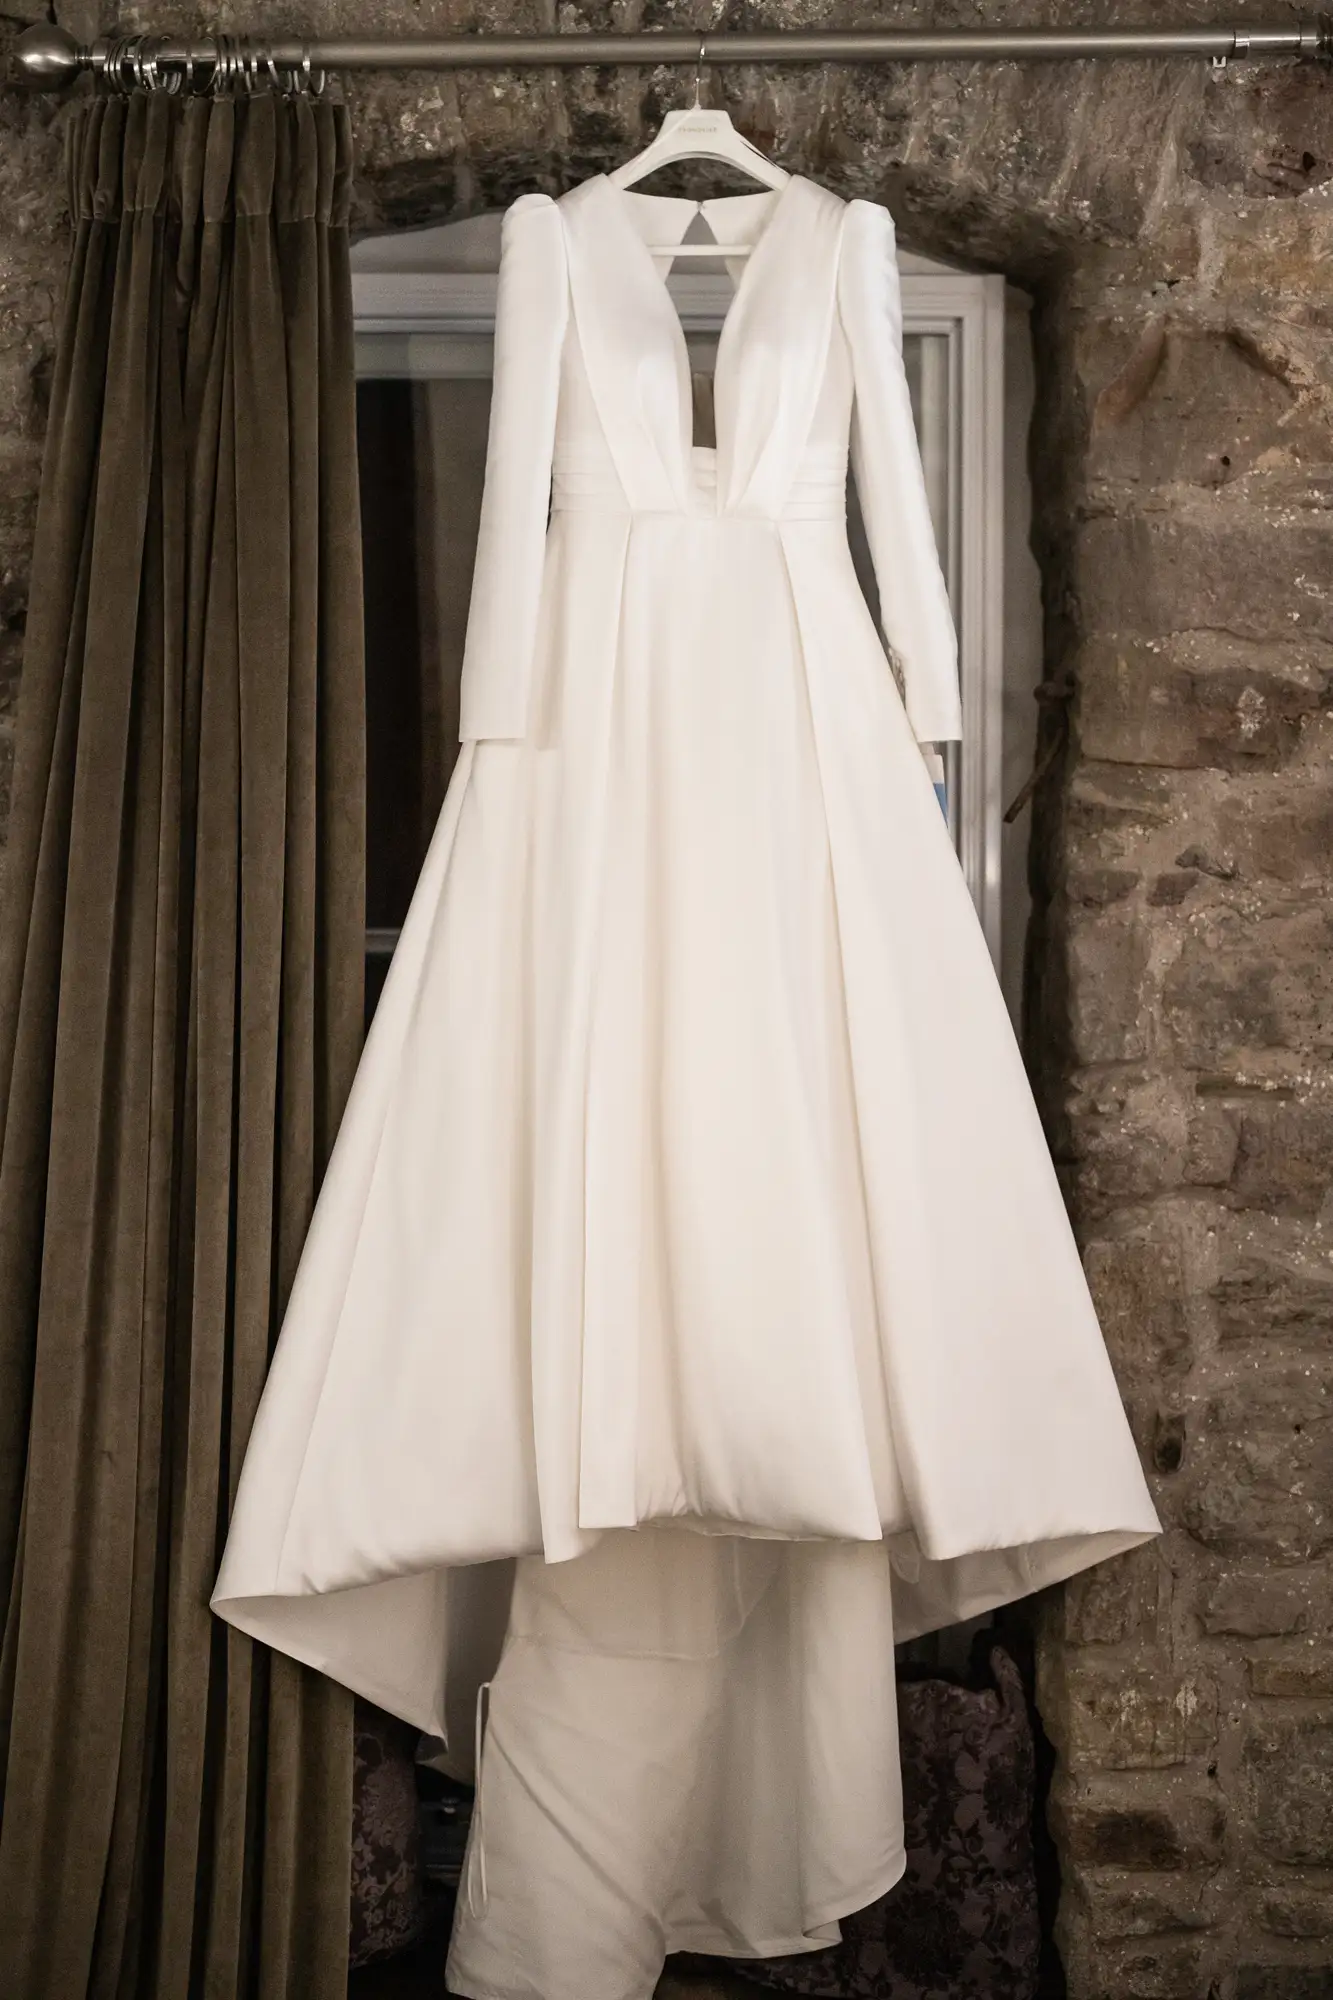 An elegant white wedding dress with long sleeves and a deep v-neckline, hanging against a rustic stone wall.